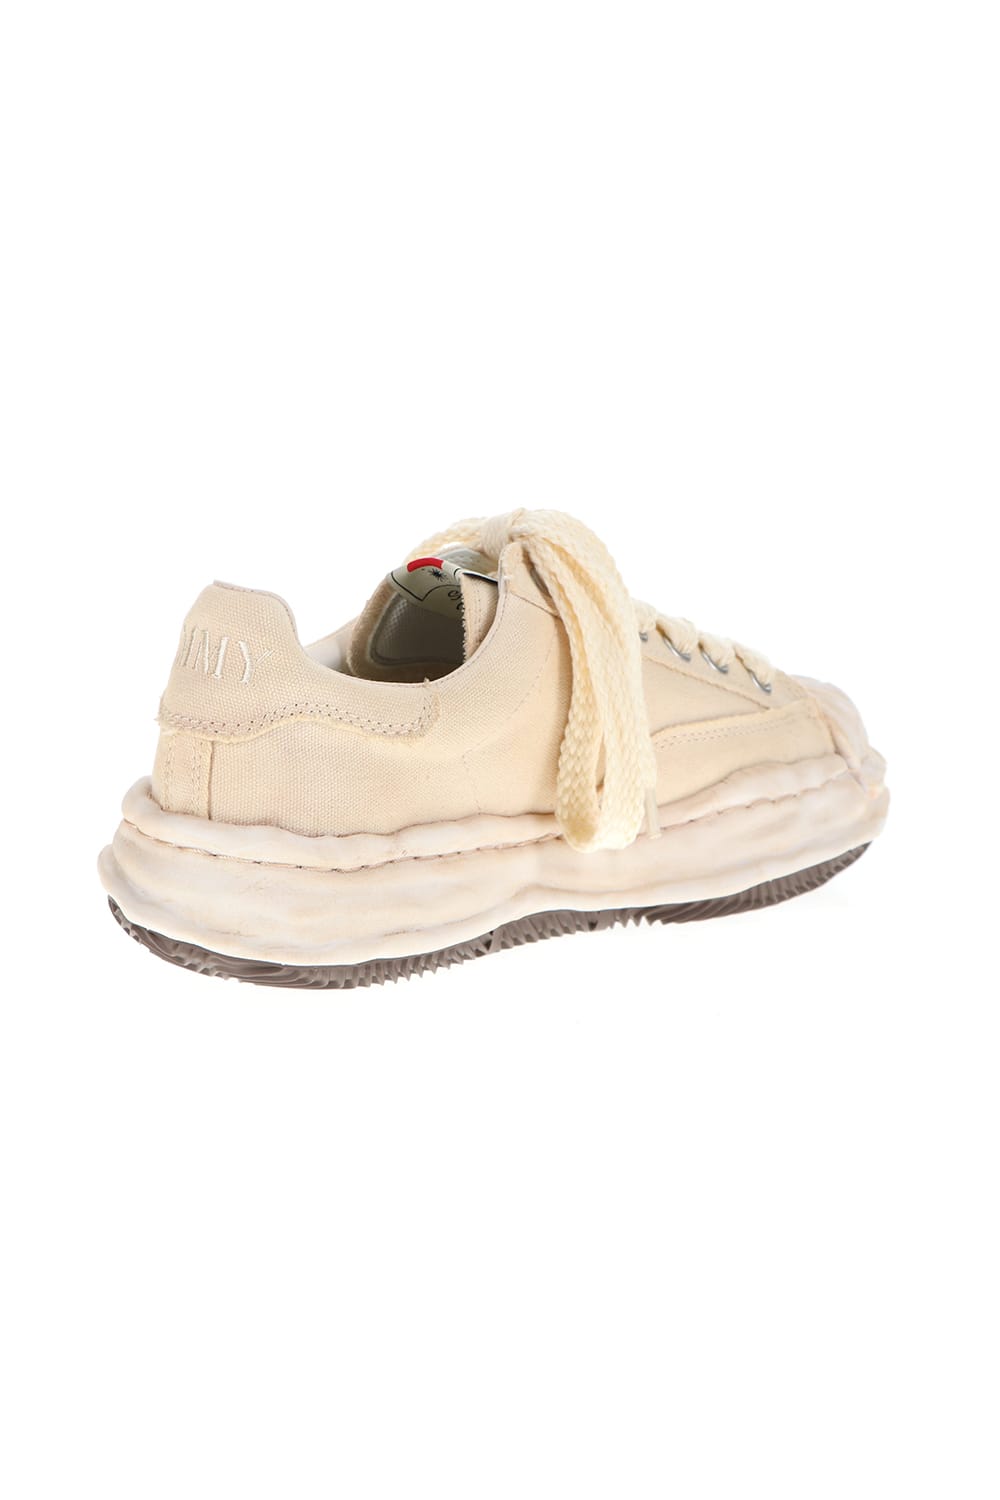 -BLAKEY Low- Original STC sole over dyed canvas Low-Top sneakers White